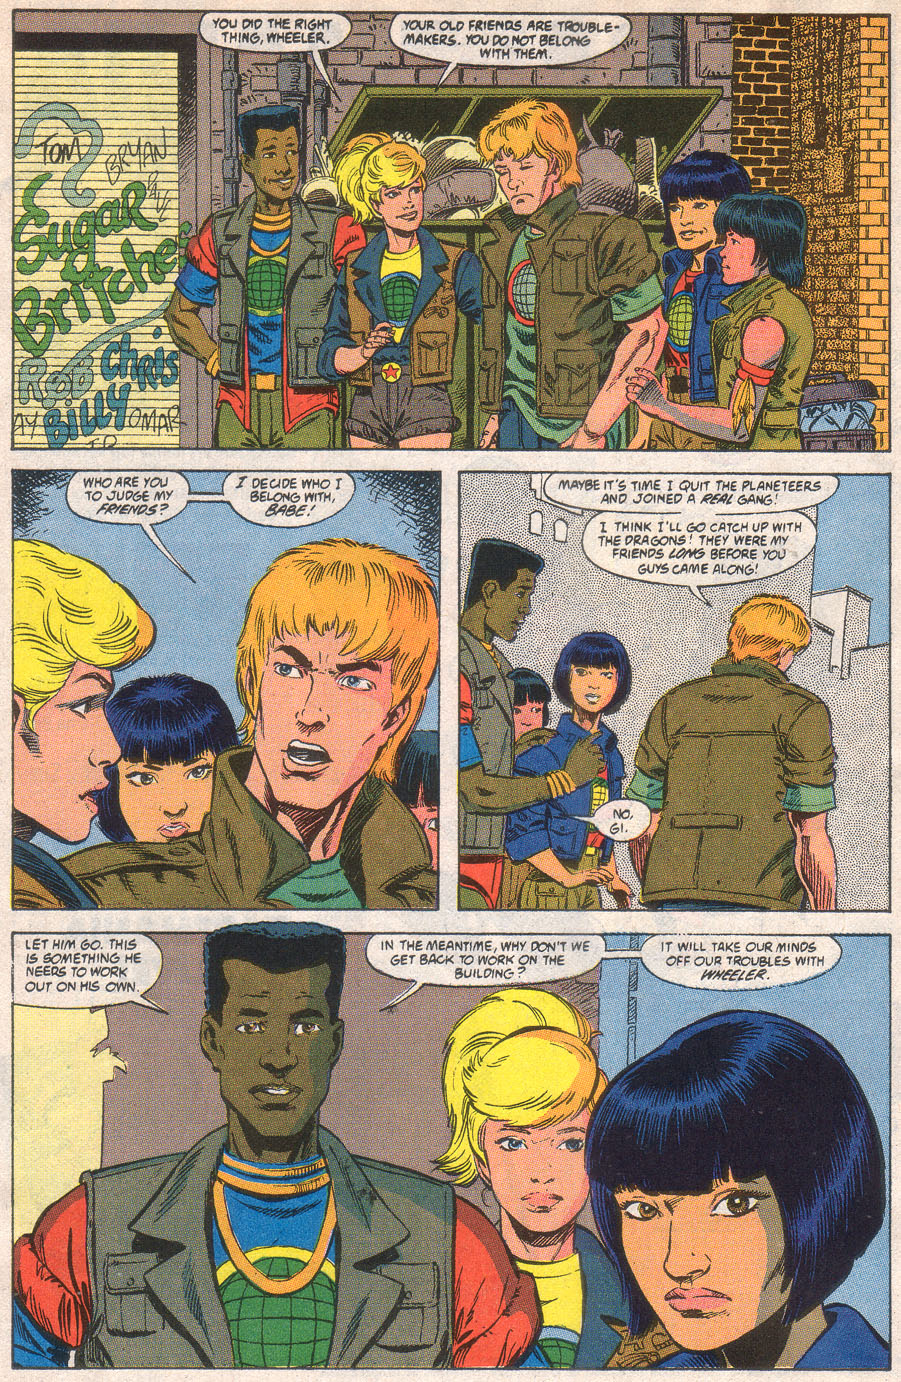 Captain Planet and the Planeteers 4 Page 7